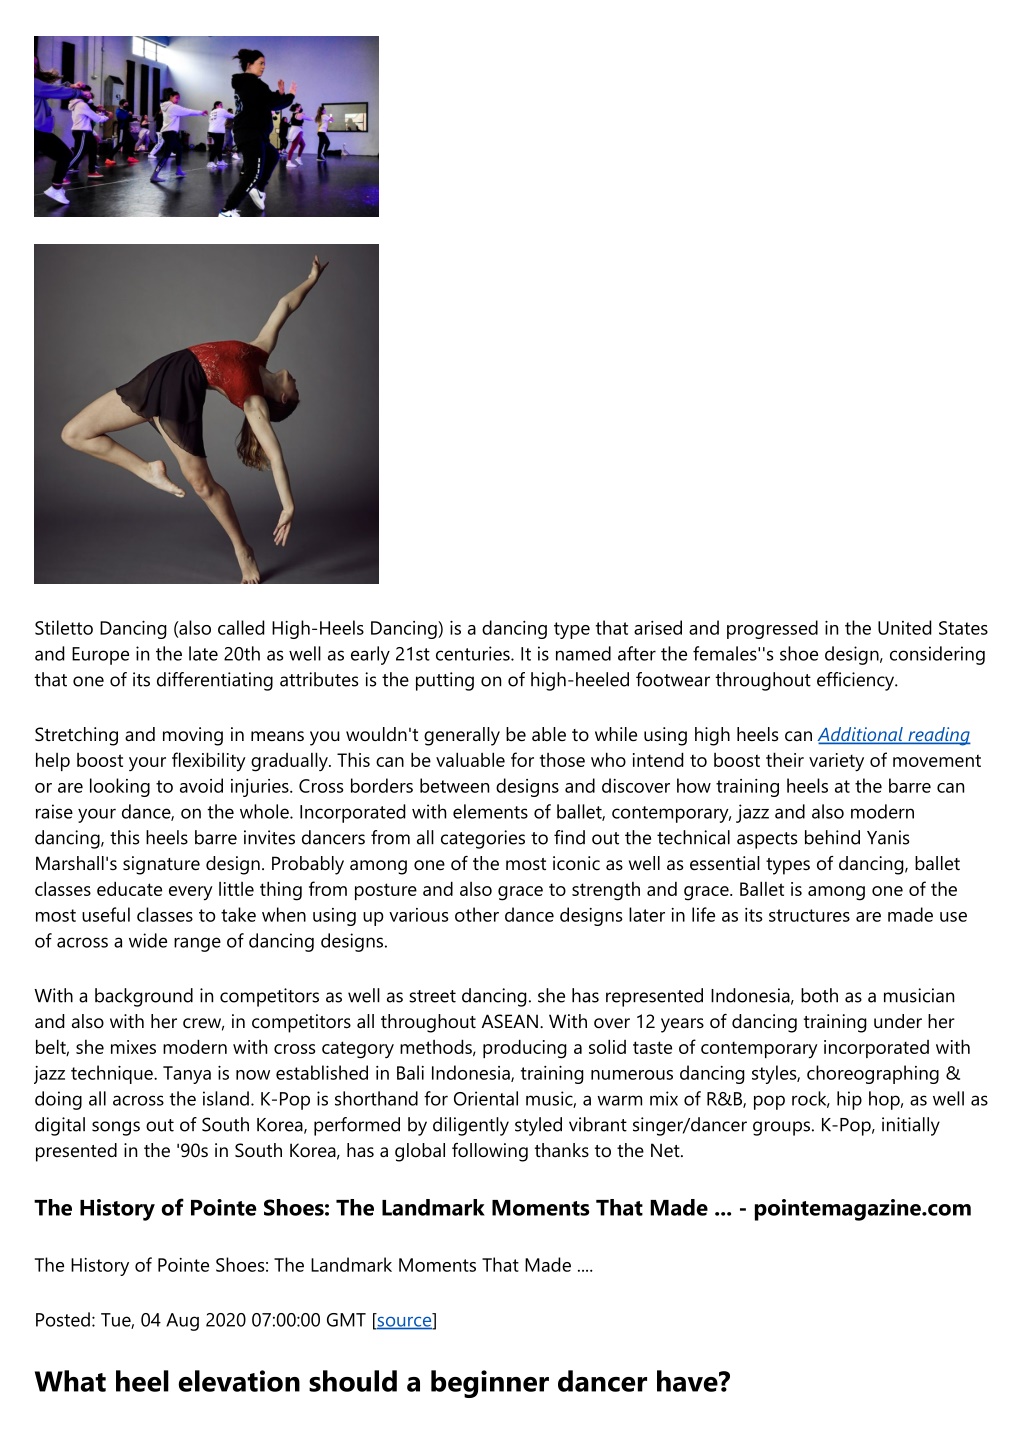 The History of Pointe Shoes: The Landmark Moments That Made